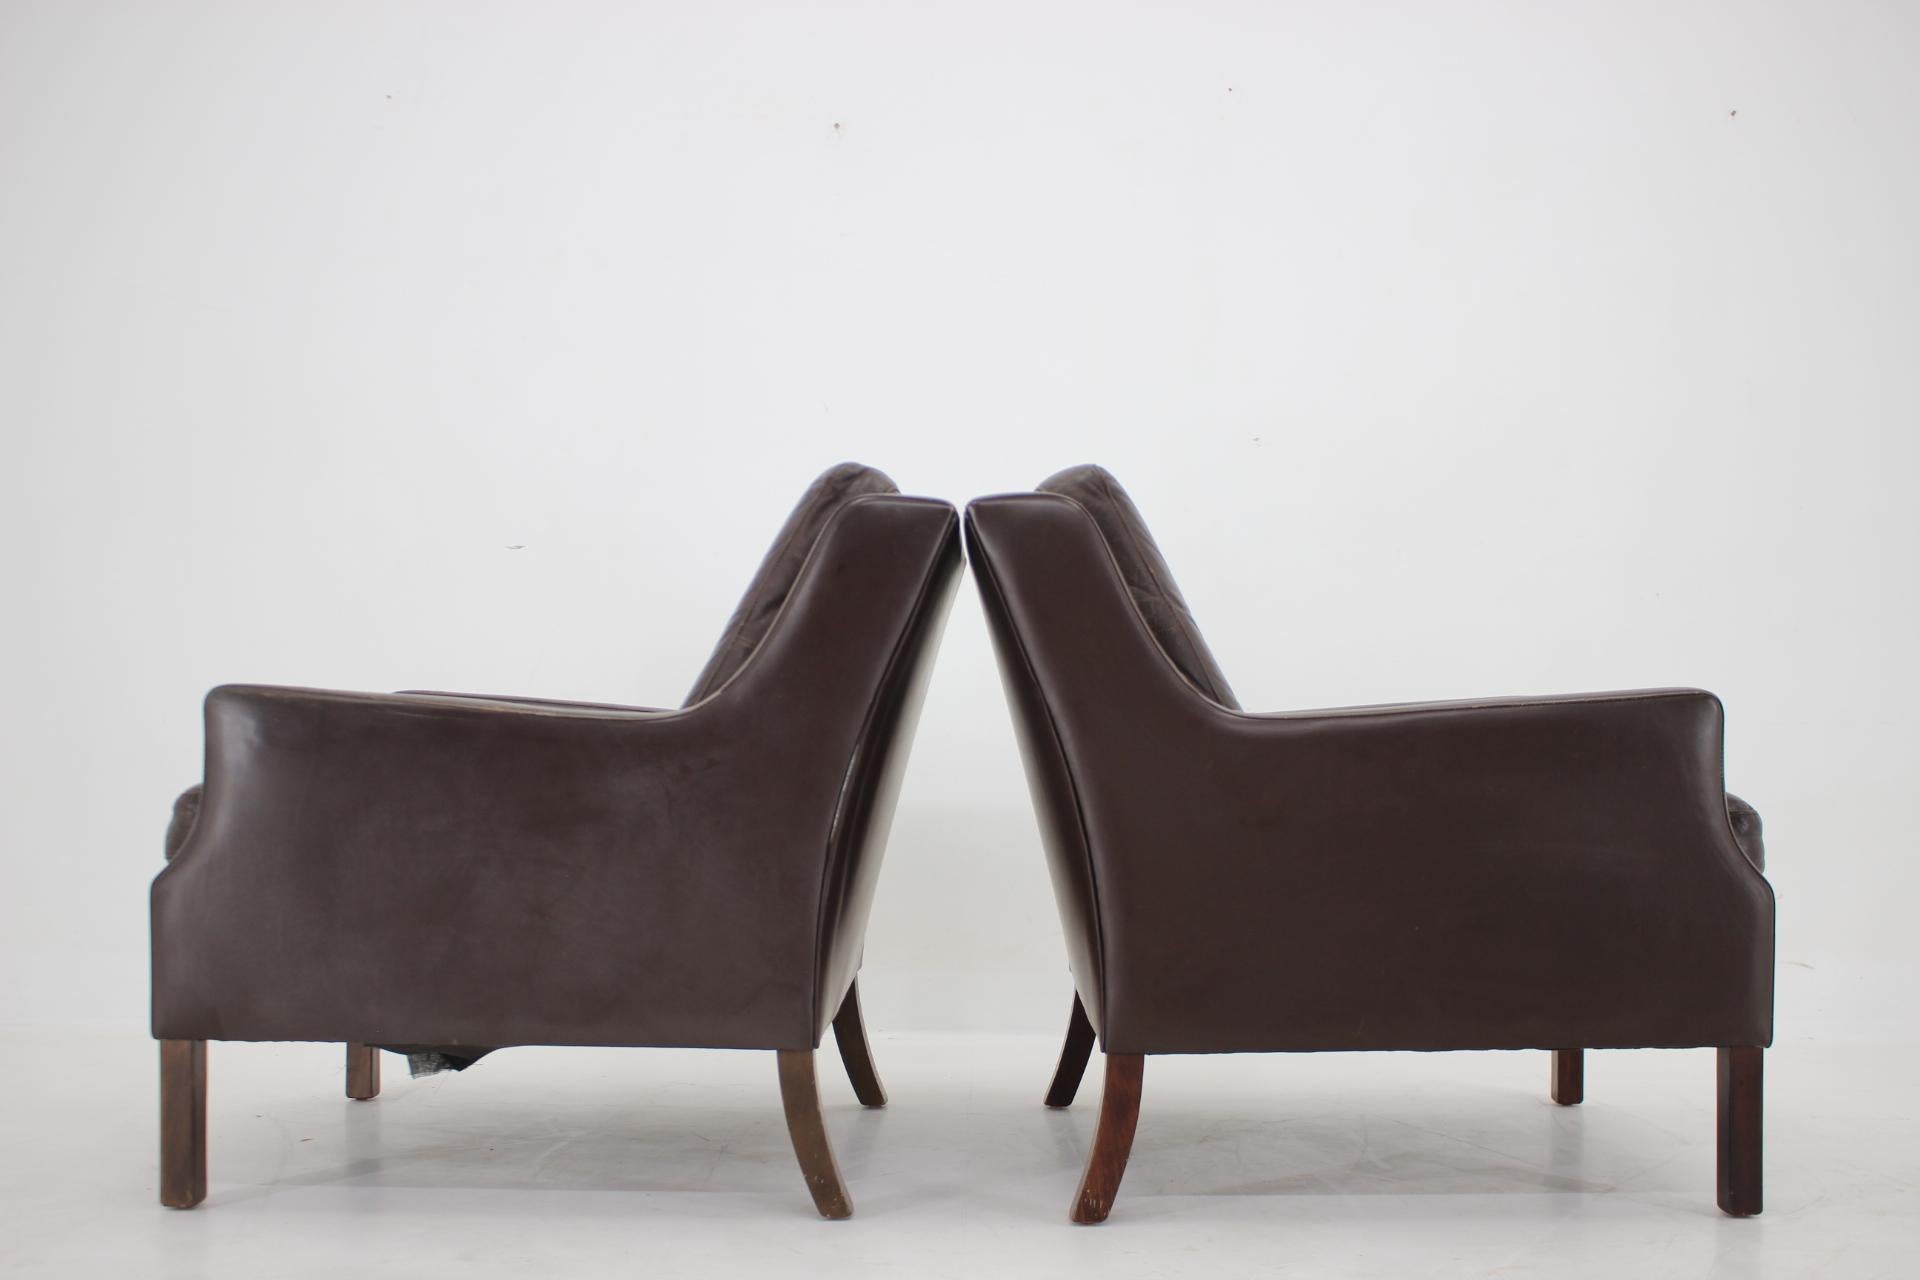 1970s Pair of Leather Armchairs, Denmark For Sale 1